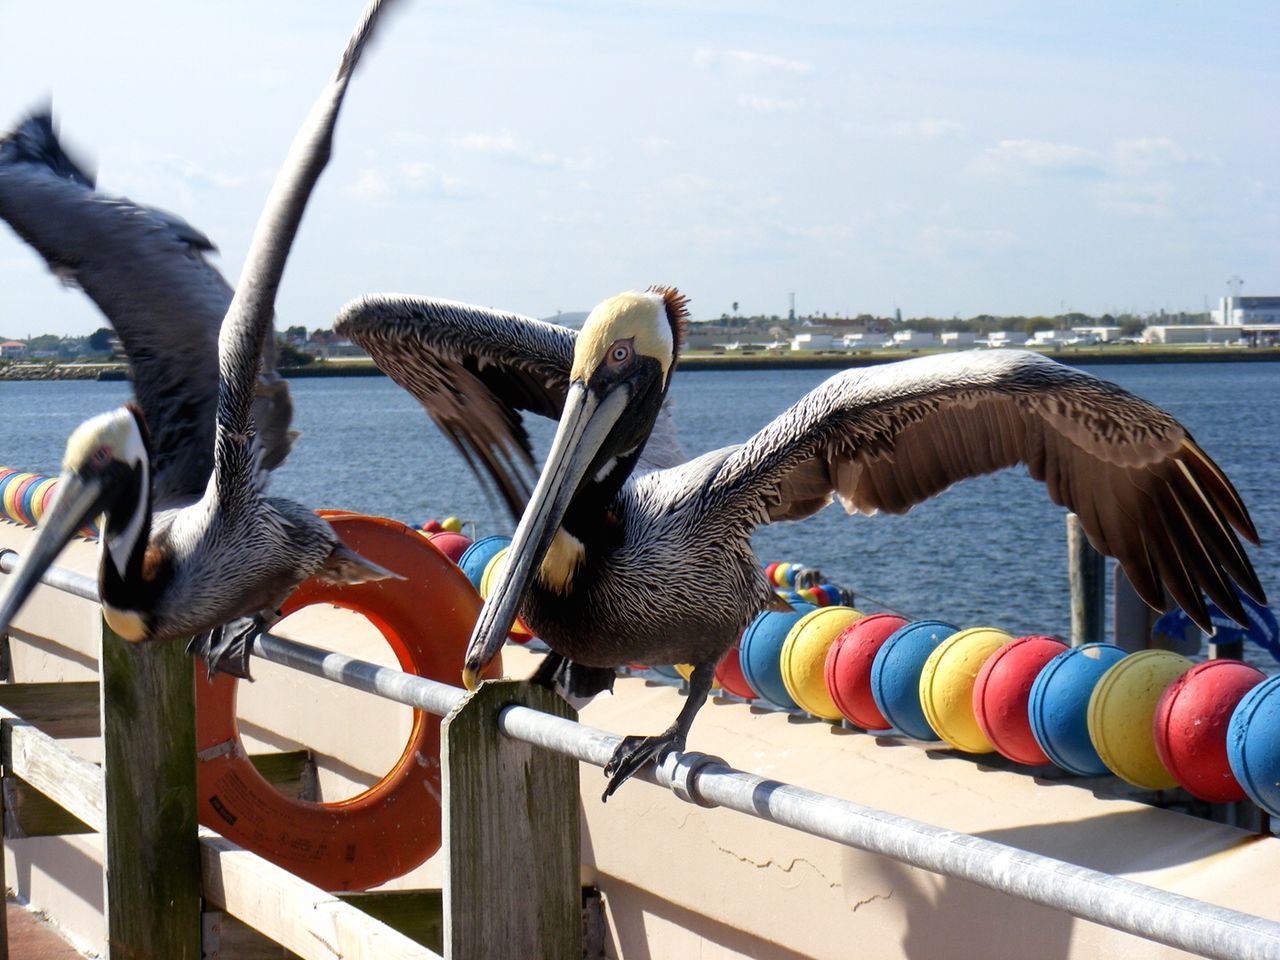 Pelicans with spread wings perching on railing by sea against sky